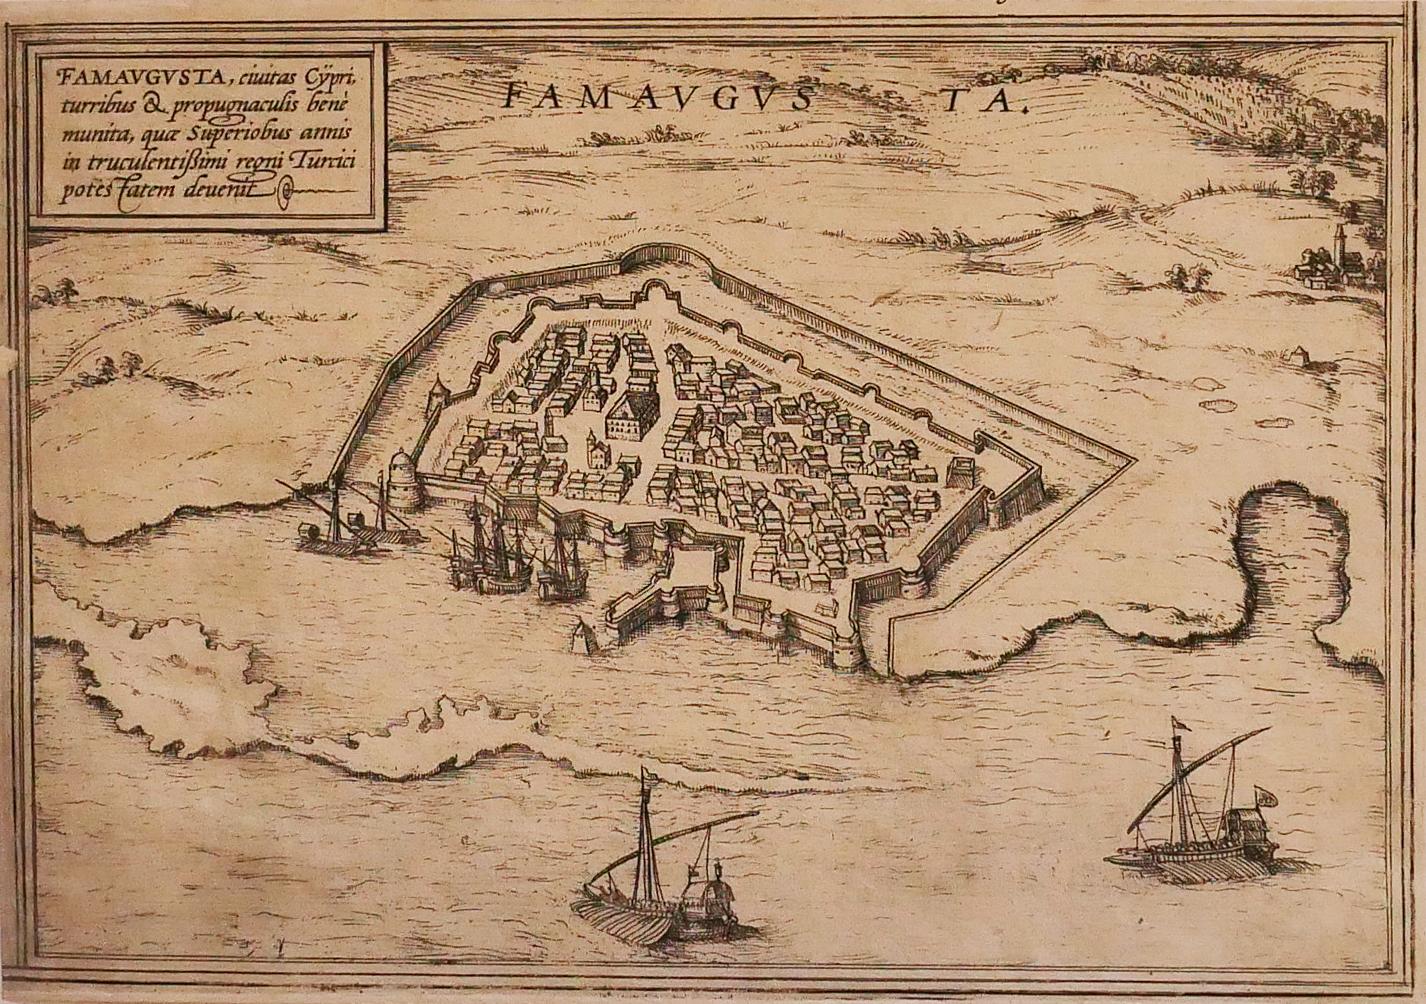 Famavgvsta is an etching realized by George Braun (1541 – 1622) 

The state of preservation of the artwork is good.

Interesting B/W etching on coeval paper, this artwork represents skilfully a detailed view of the city of 

Famavgvsta through